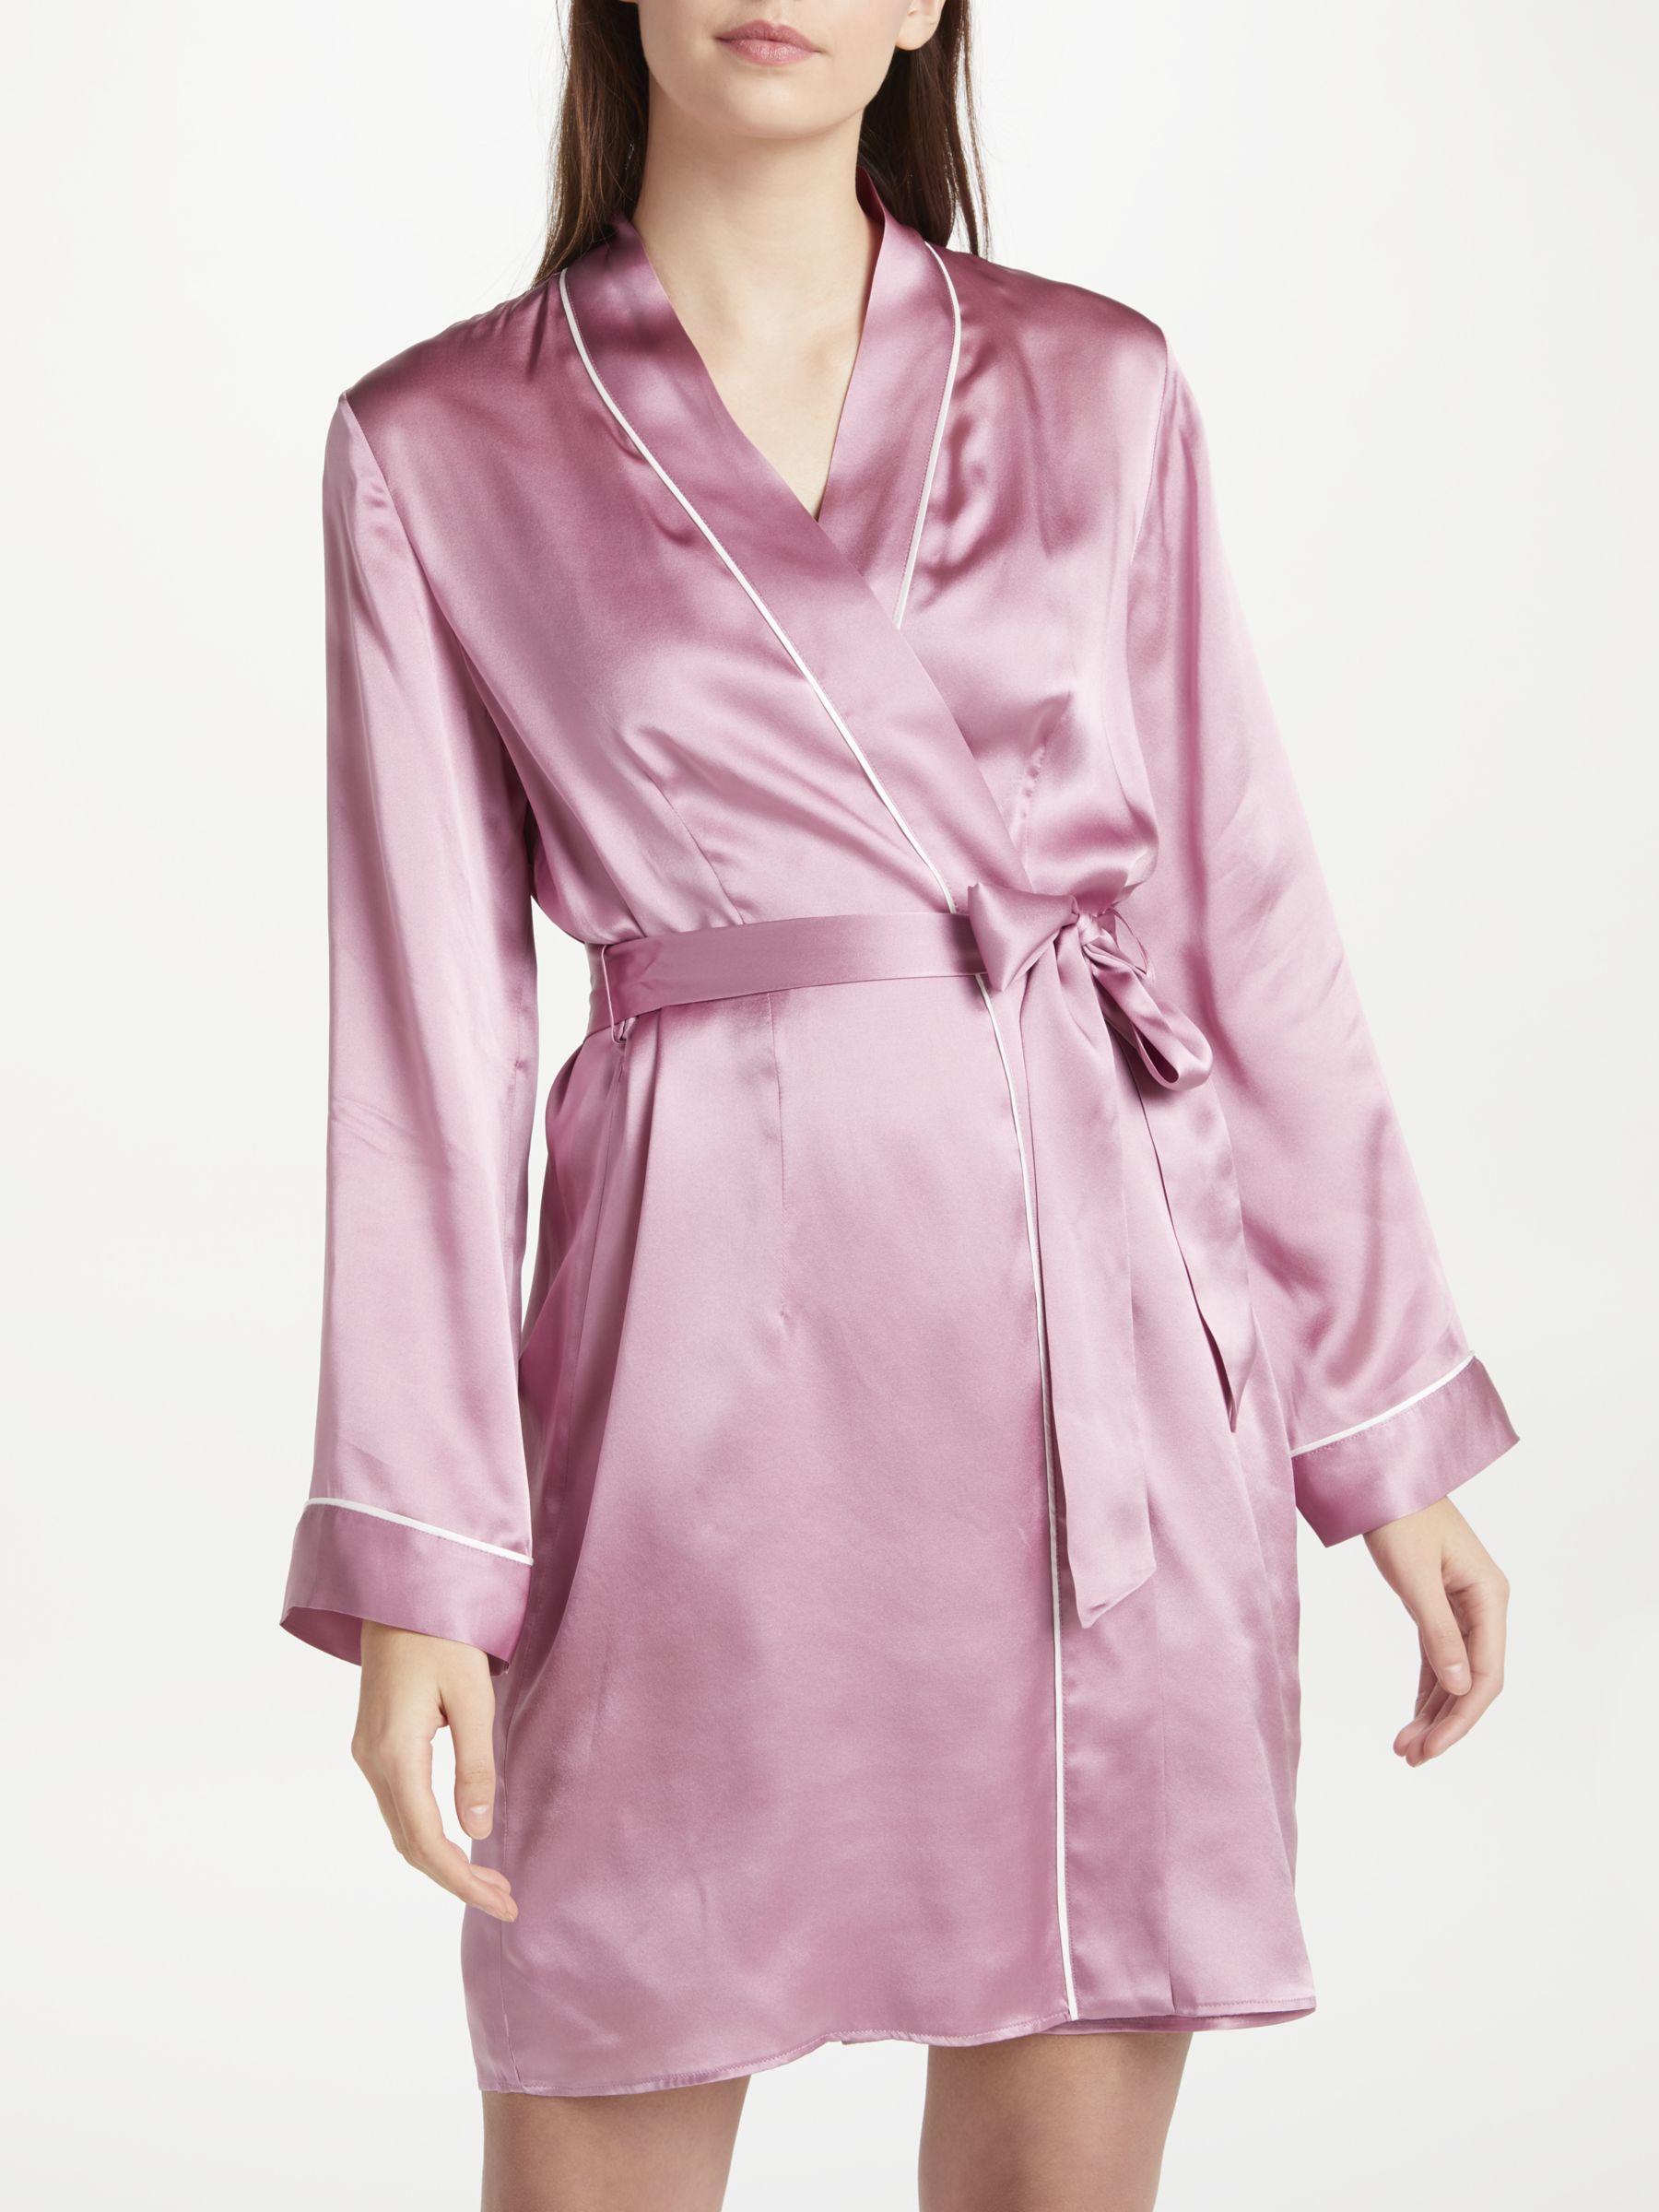 silk nightdress and dressing gown